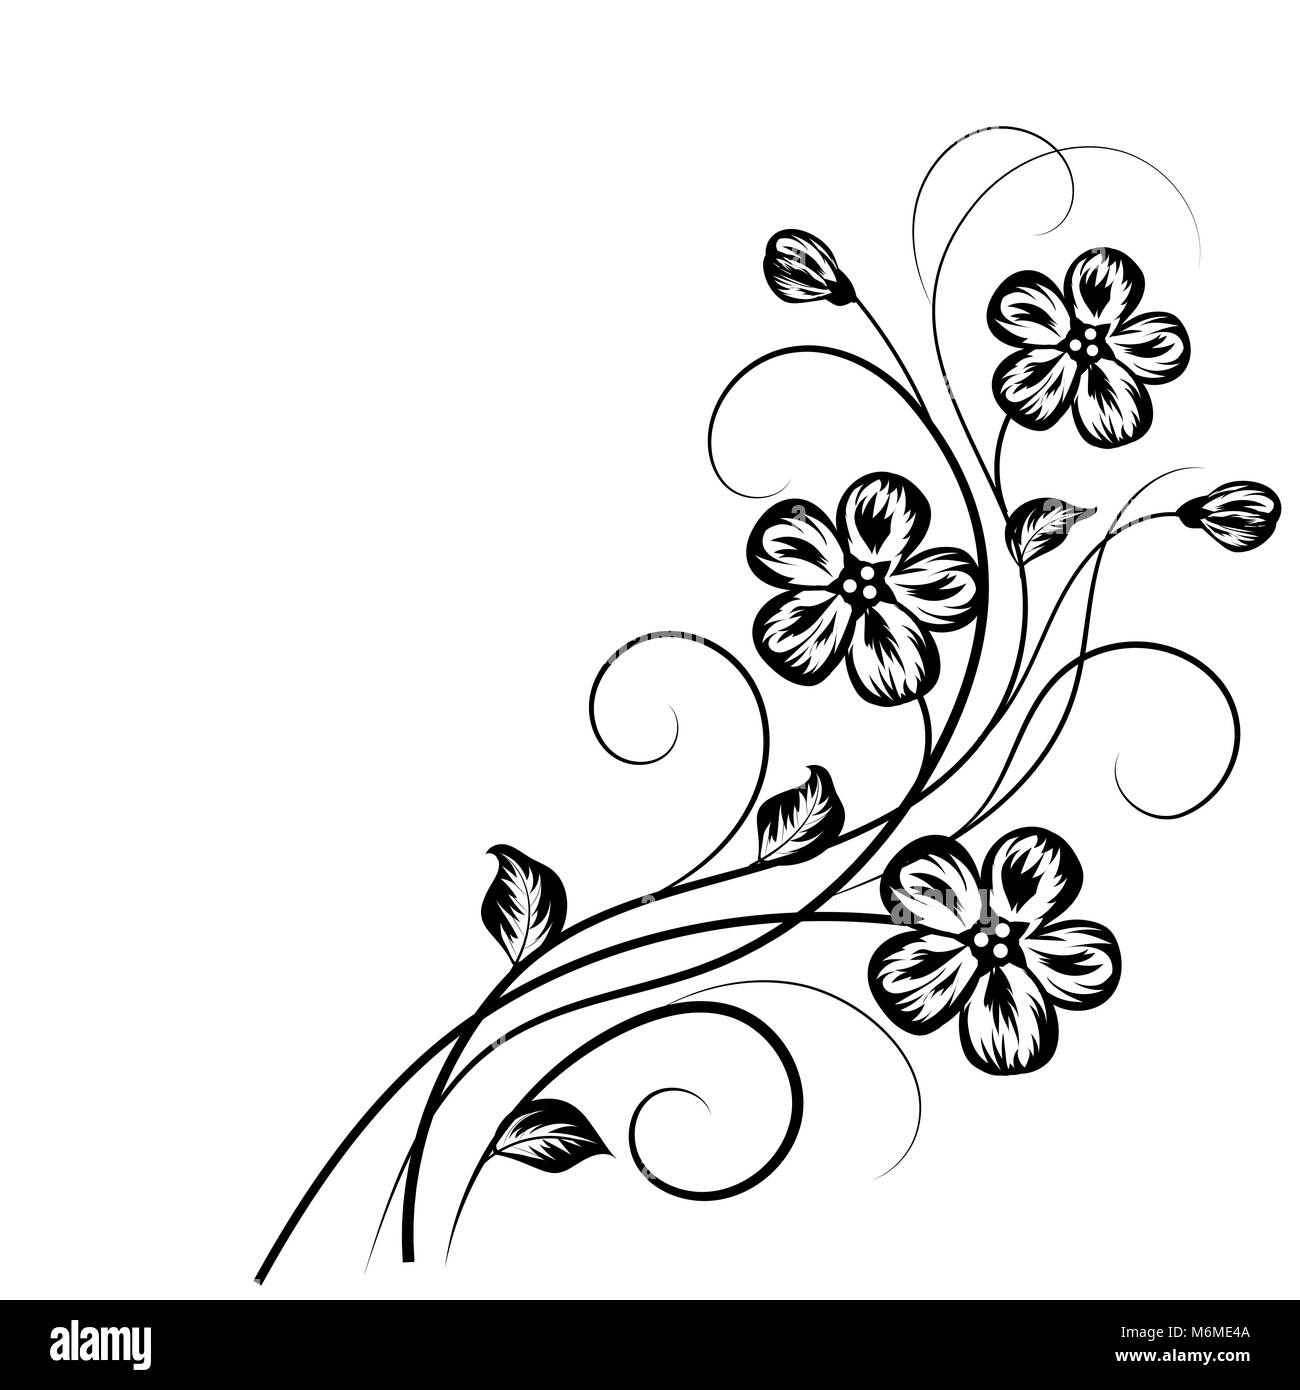 Floral background in black and white Stock Vector